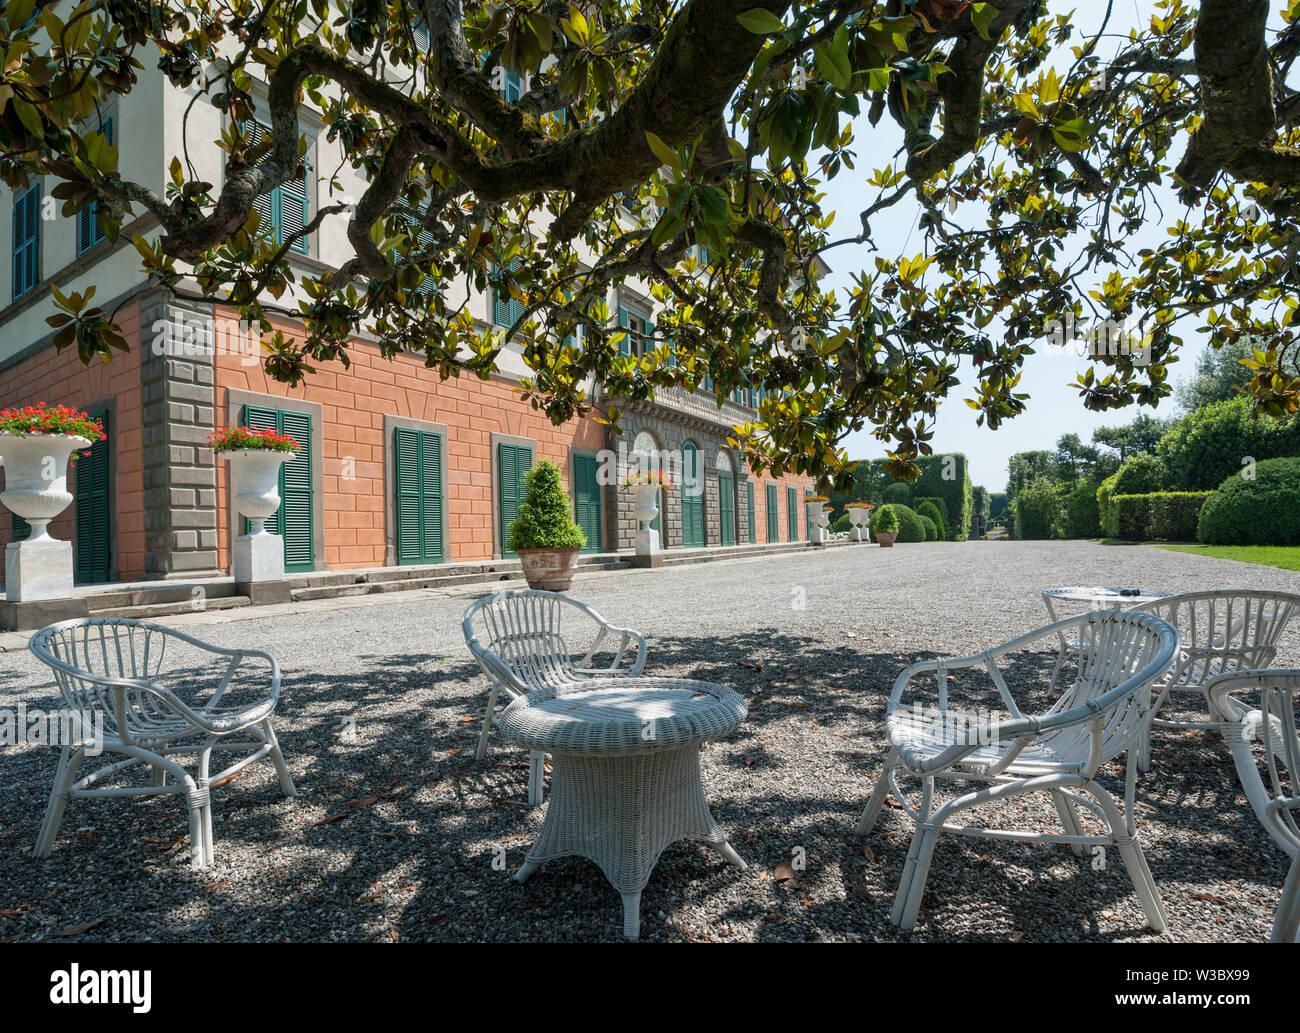 Marlia, Lucca, Italy - 2018, May 25: Tables and chairs in the shadow of a large tree, in the villa's forecourt. Villa Reale in Marlia, Lucca, Italy. Stock Photo